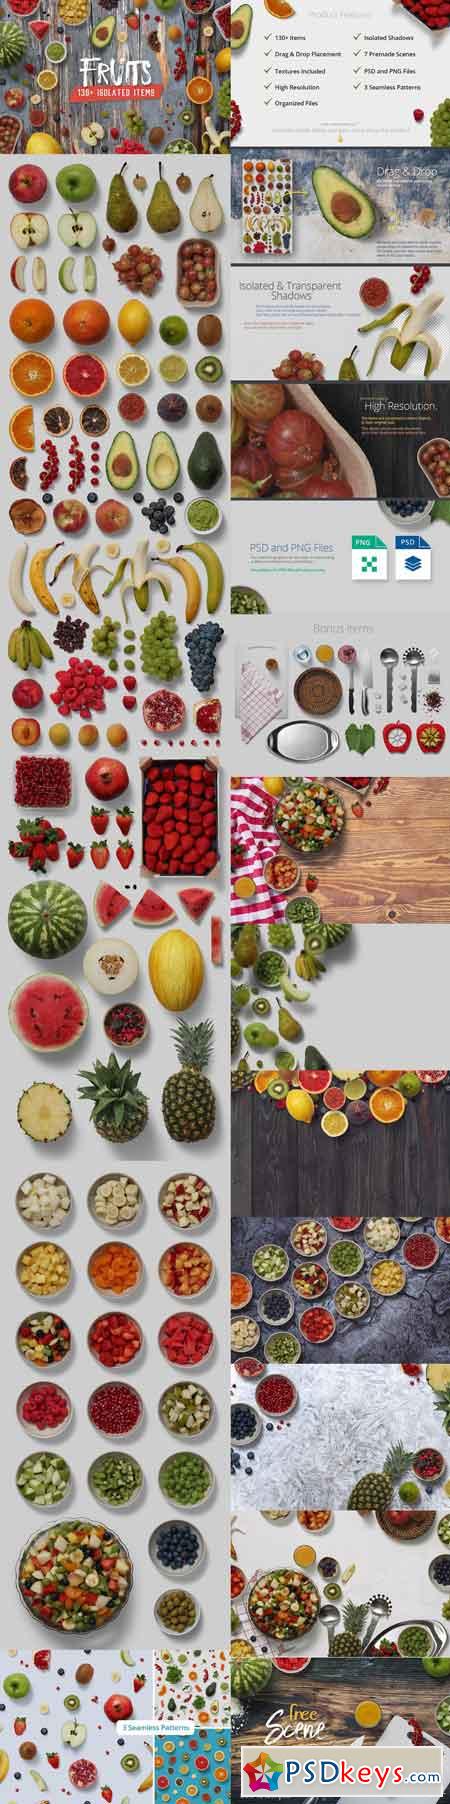 Fruits - Isolated Food Items 2135412